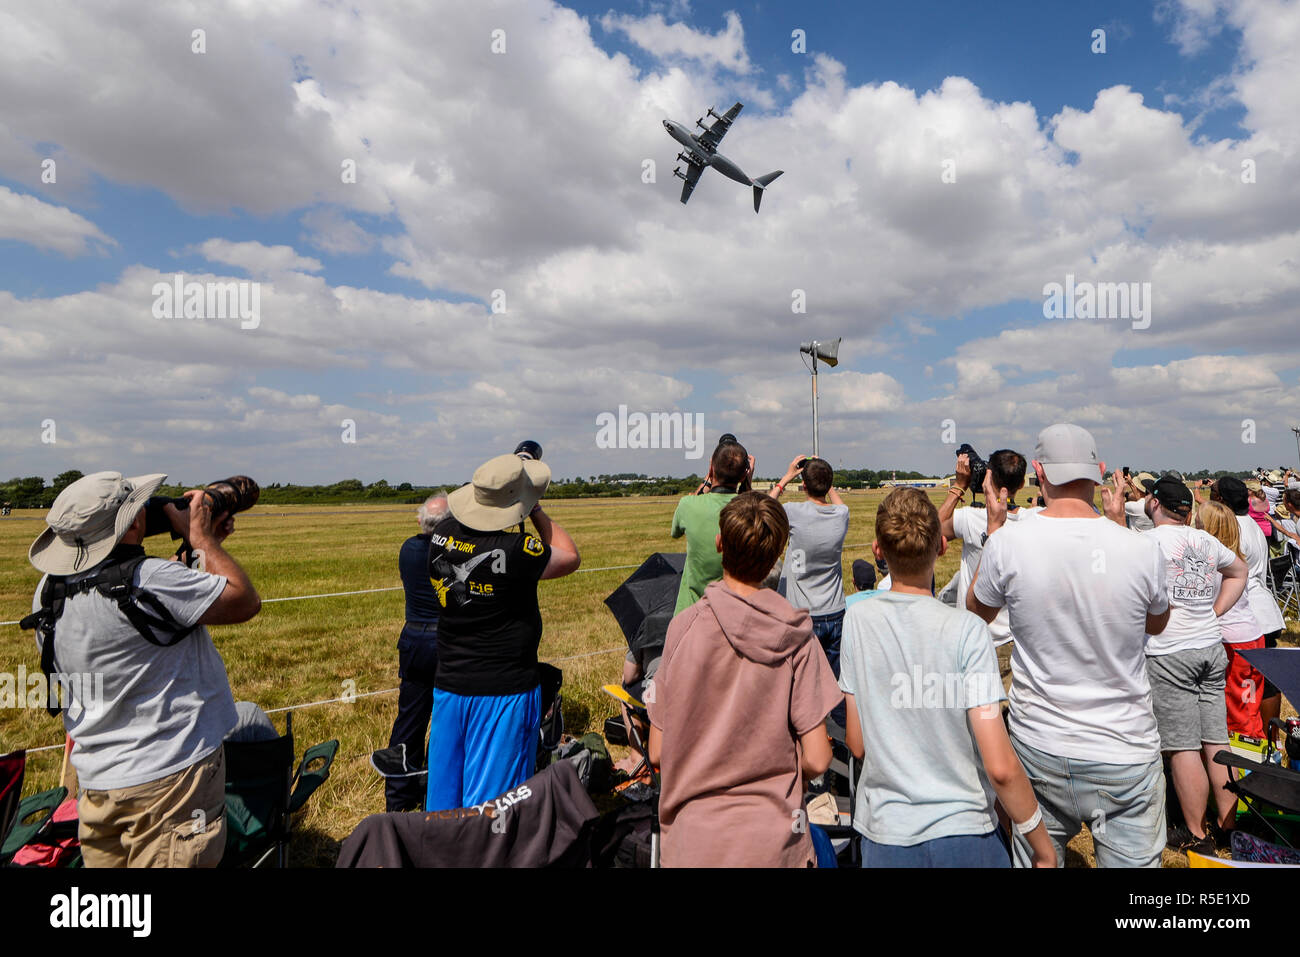 Crowds watching the airshow at the Royal International Air Tattoo air show, RIAT, RAF Fairford. Airbus A400M transport plane leaping into the air Stock Photo